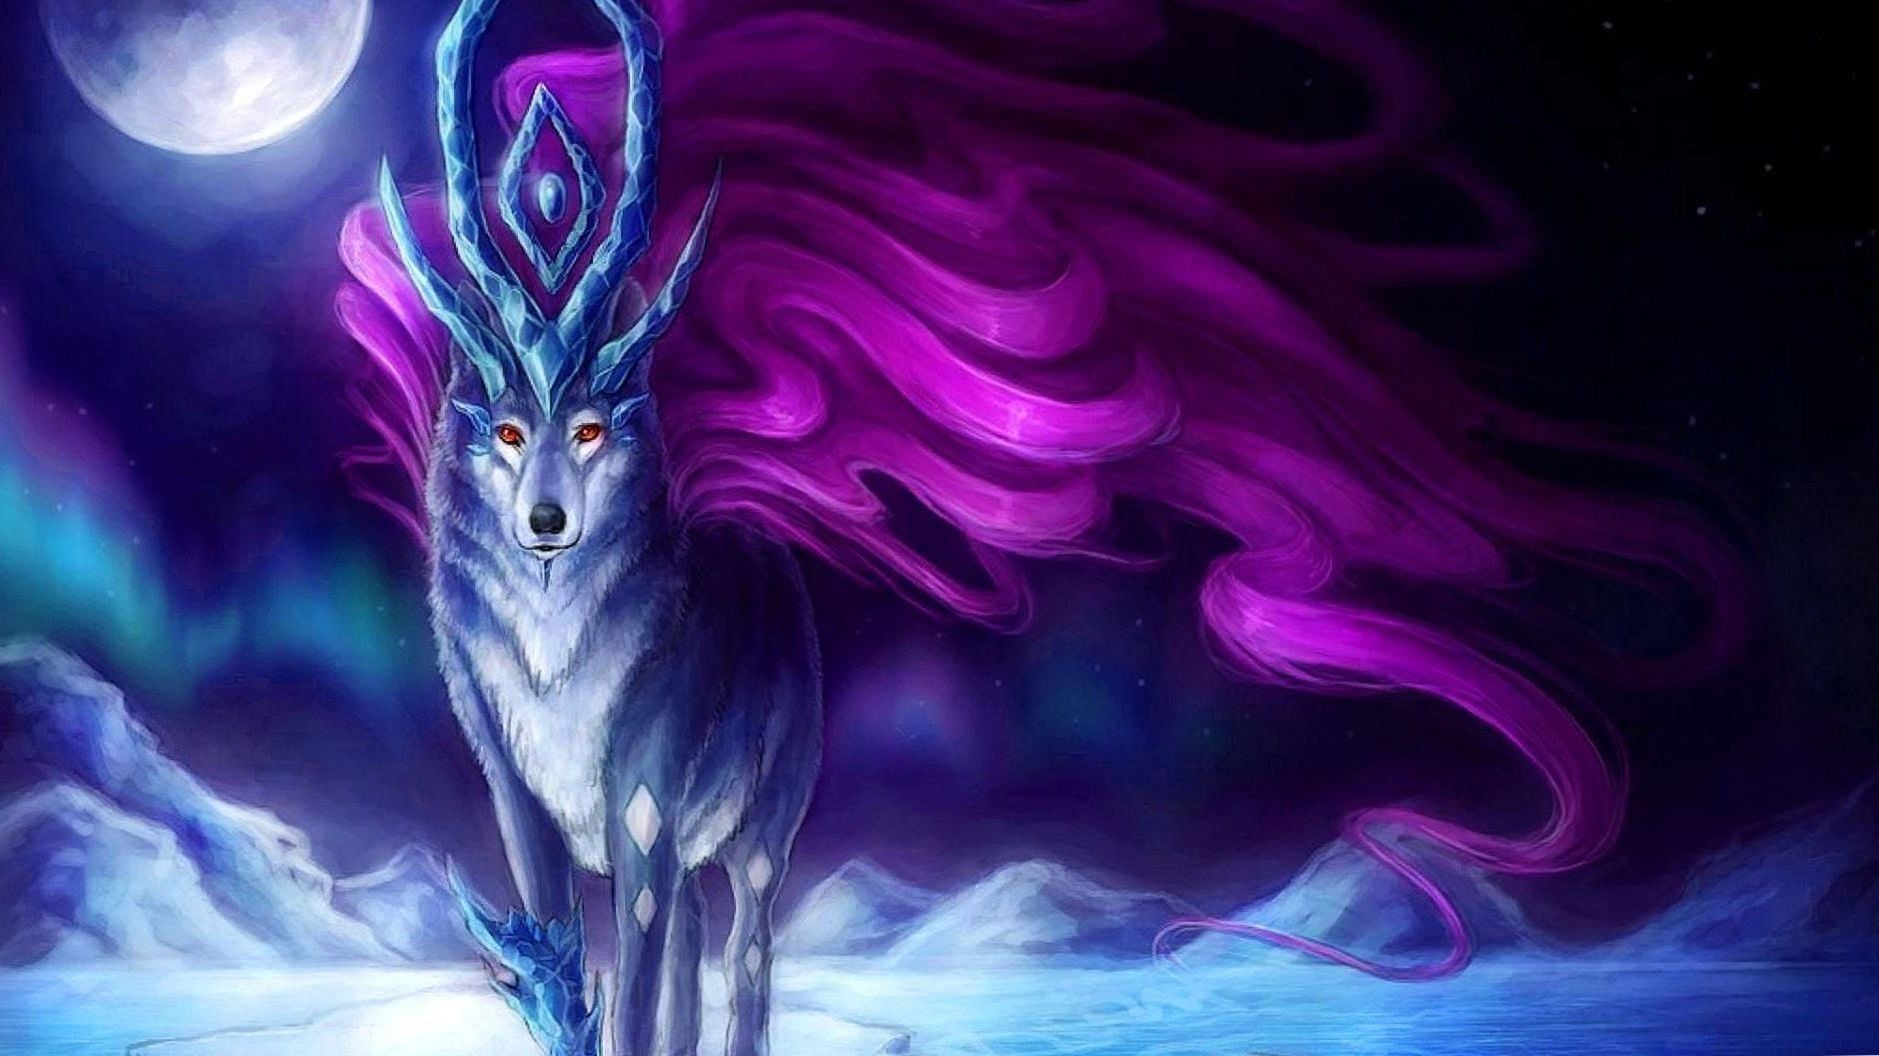 Awesome Anime Wolves Wallpaper. Wolf wallpaper, Anime wolf